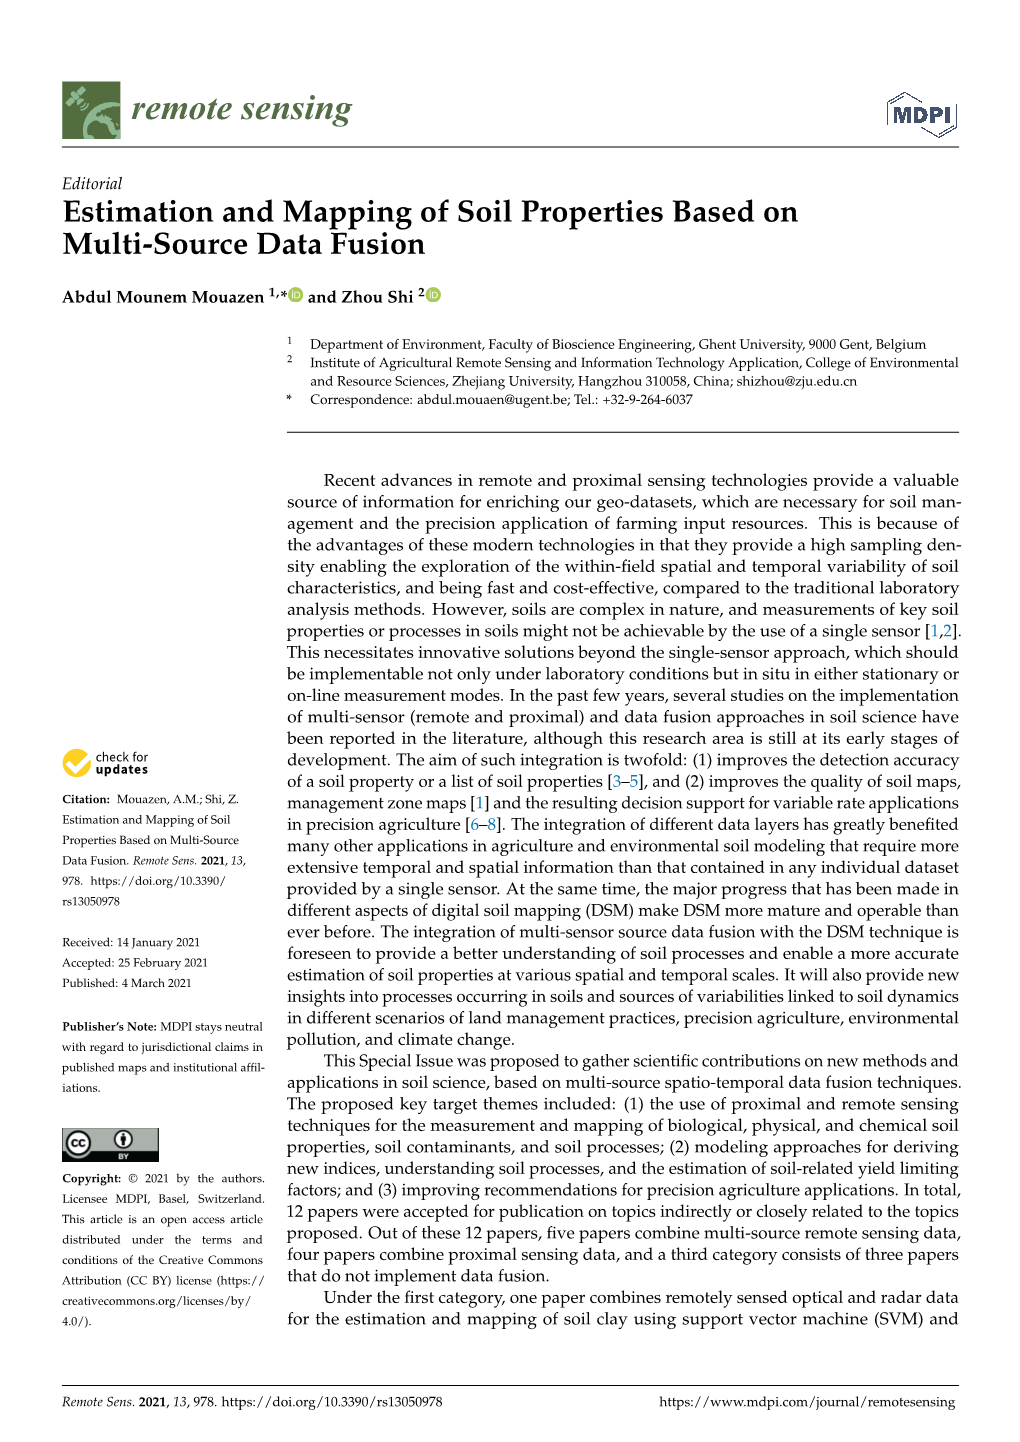 Estimation and Mapping of Soil Properties Based on Multi-Source Data Fusion